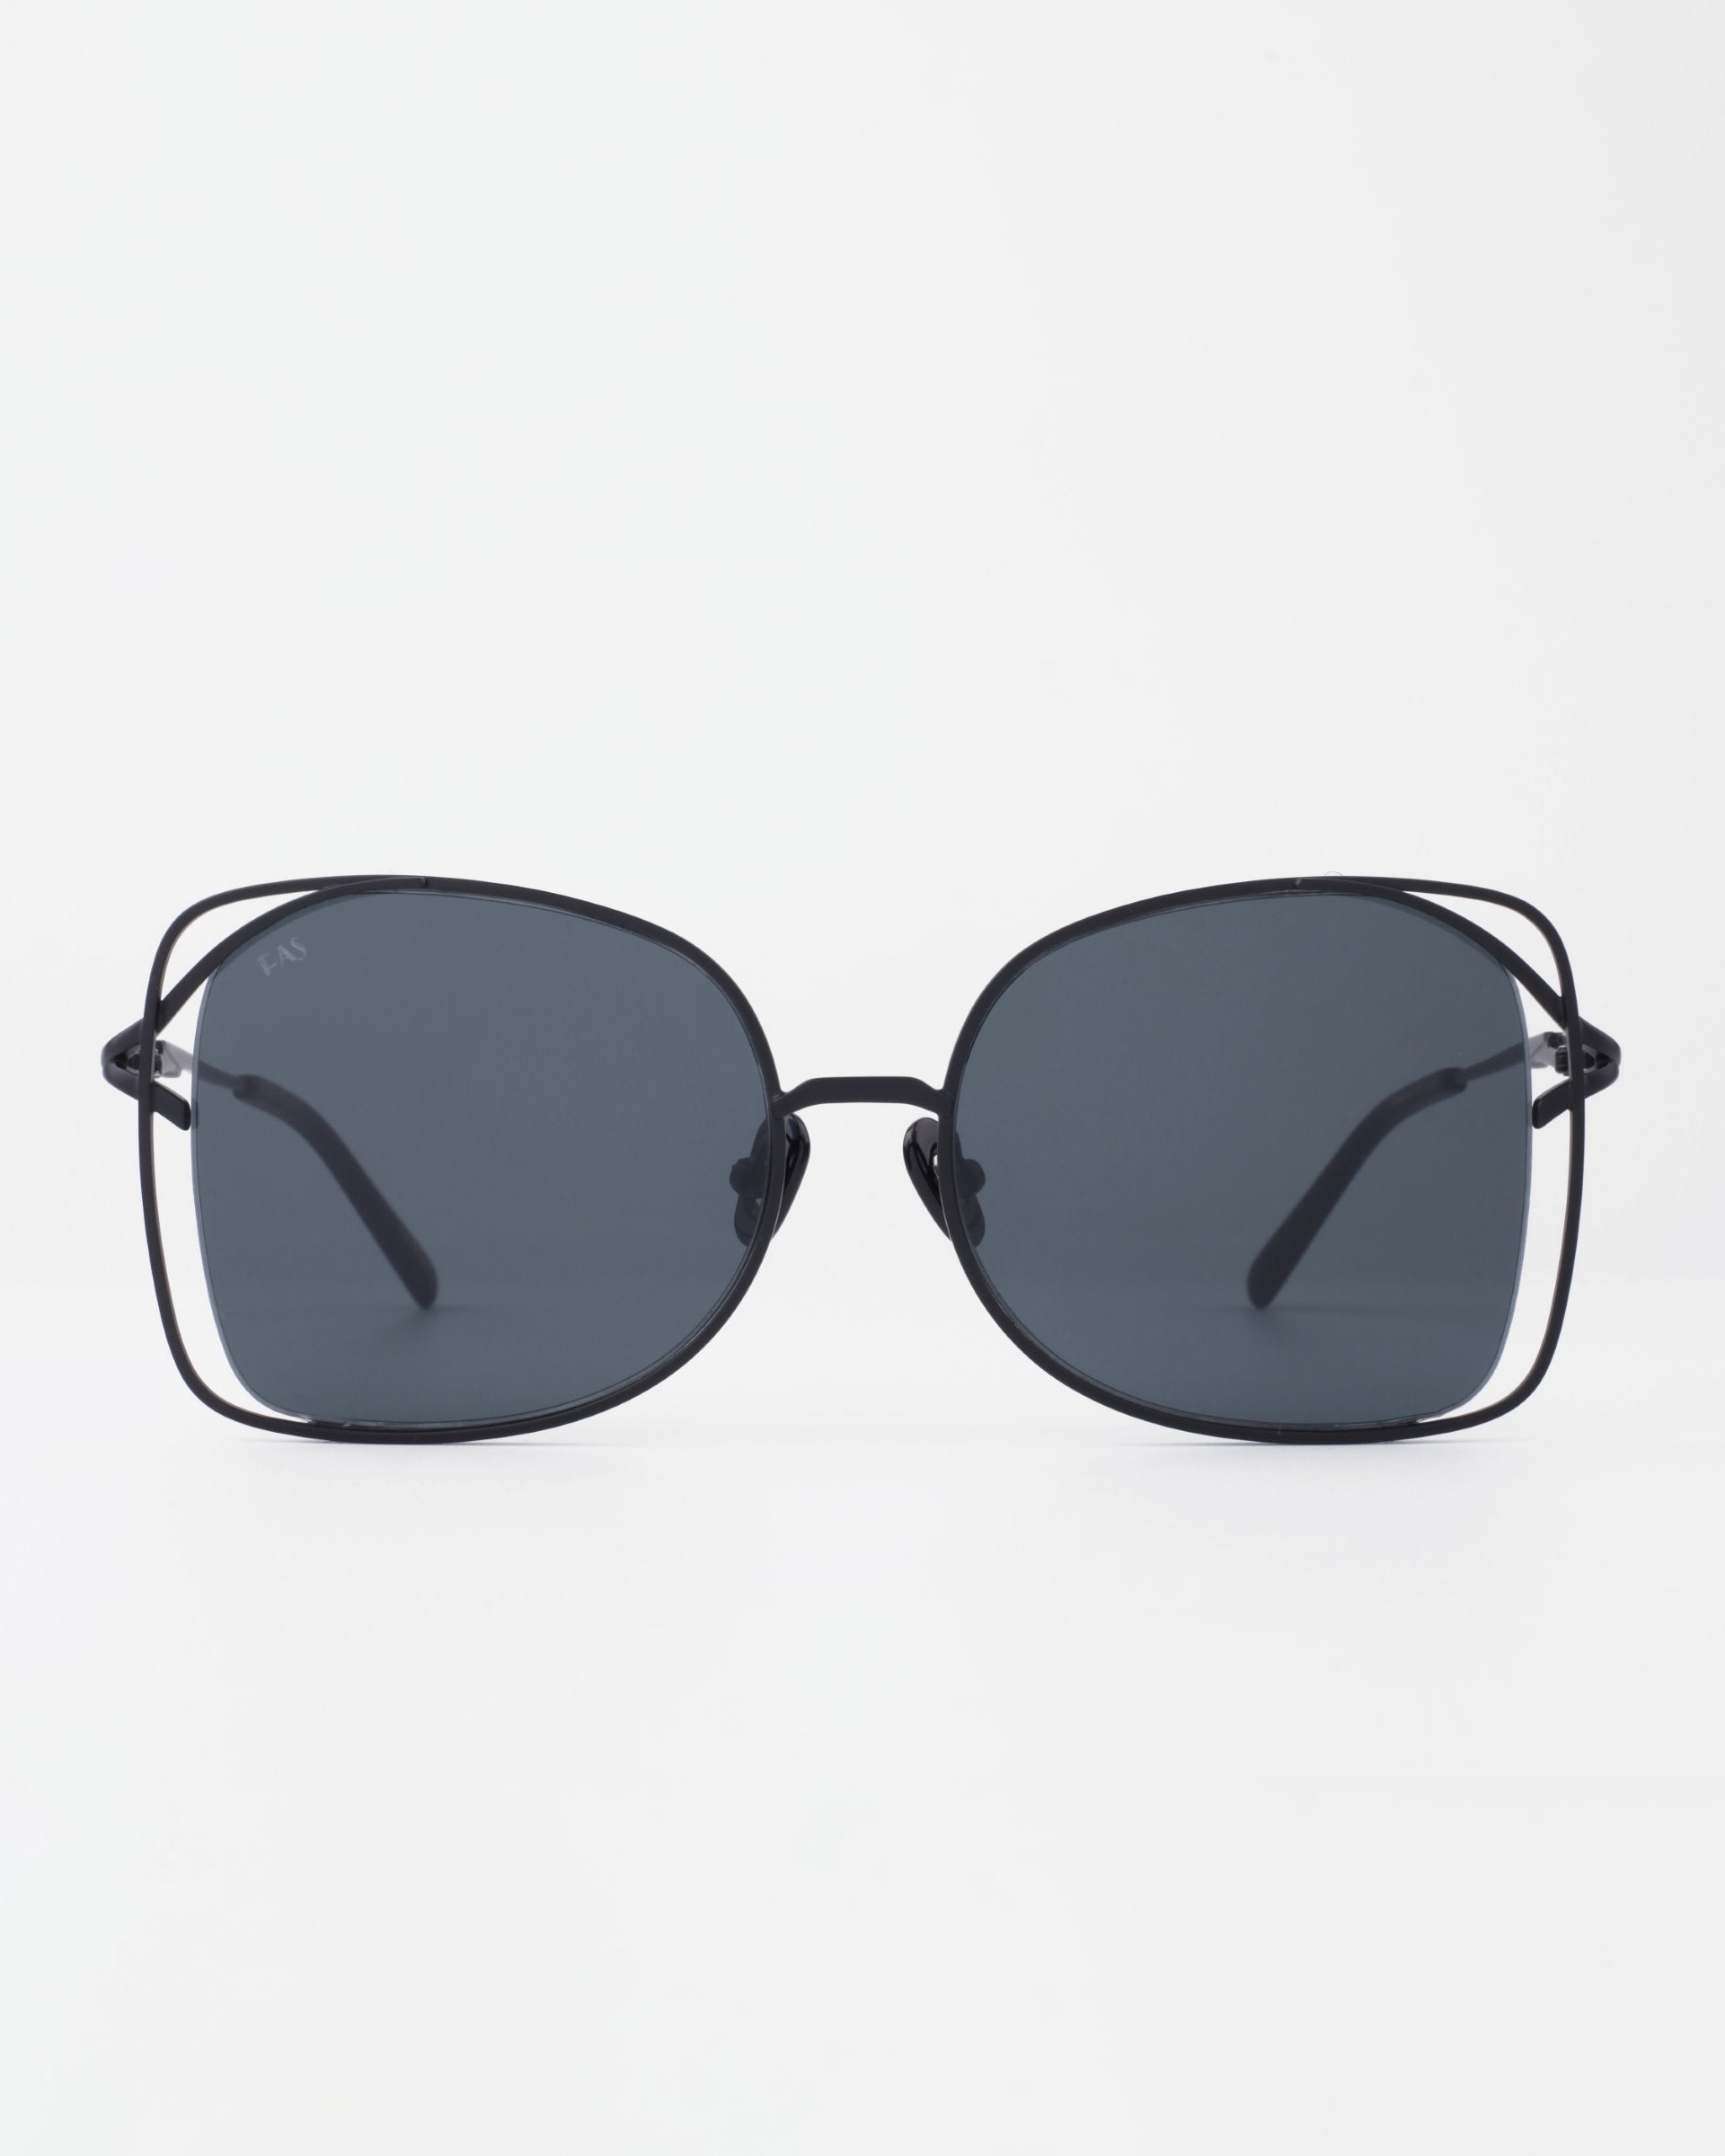 A pair of black-framed Carousel sunglasses by For Art&#39;s Sake® with large, slightly rounded square lenses and thin temples. The lenses are dark tinted, providing a sleek and stylish appearance with UVA &amp; UVB protection. Handmade sunglasses crafted for elegance. The background is plain white.